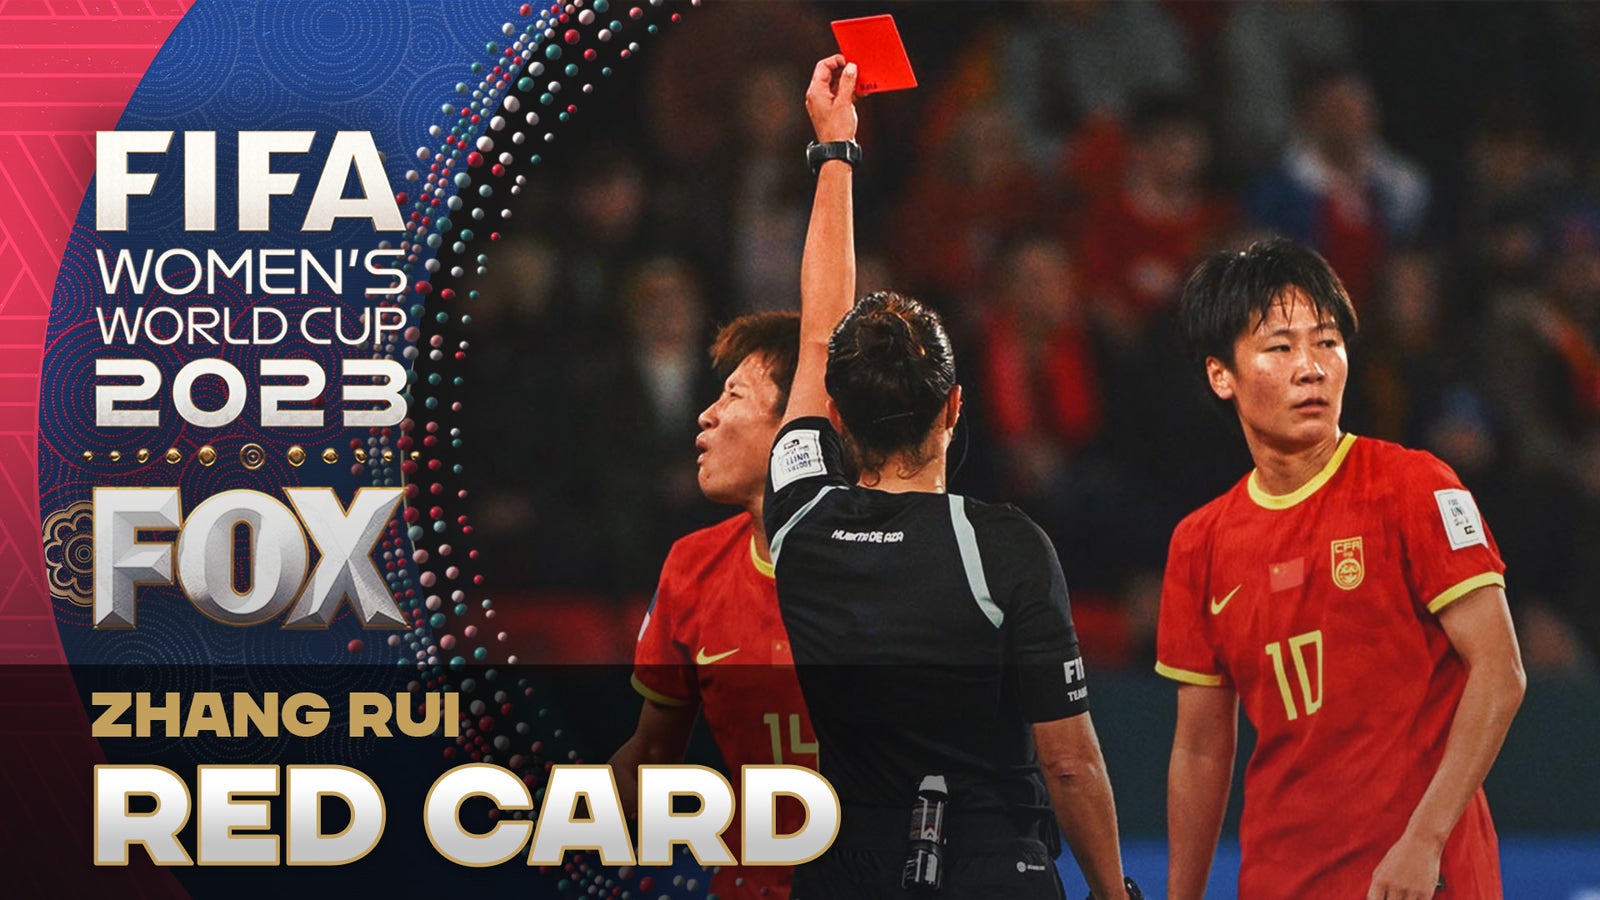 China's Zhang Rui ejected after receiving a red card 